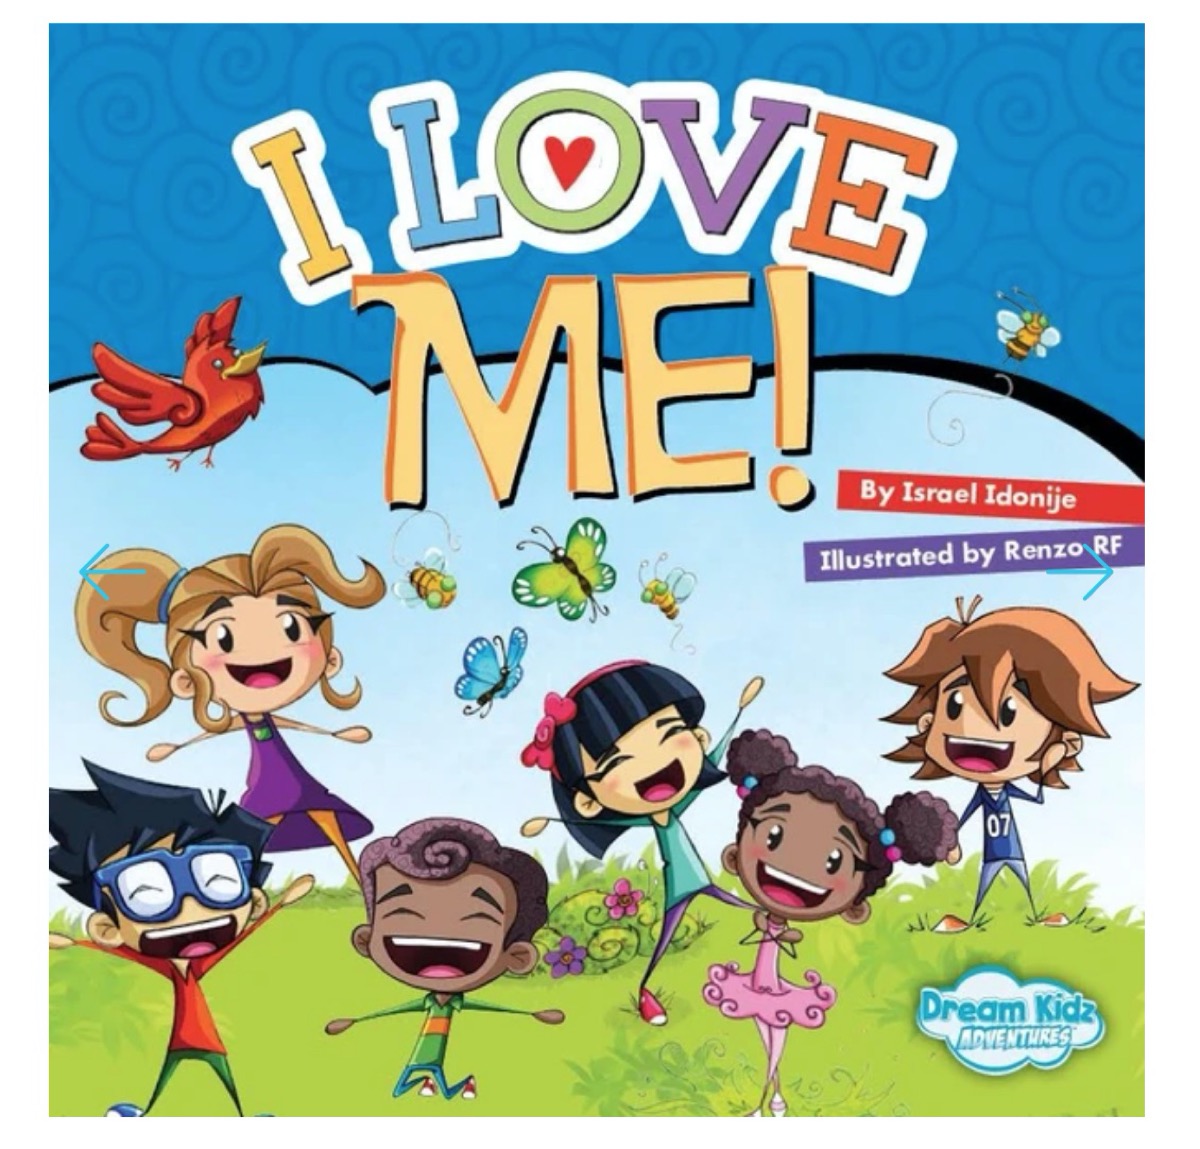 book with "i love me" and multi racial children on the cover